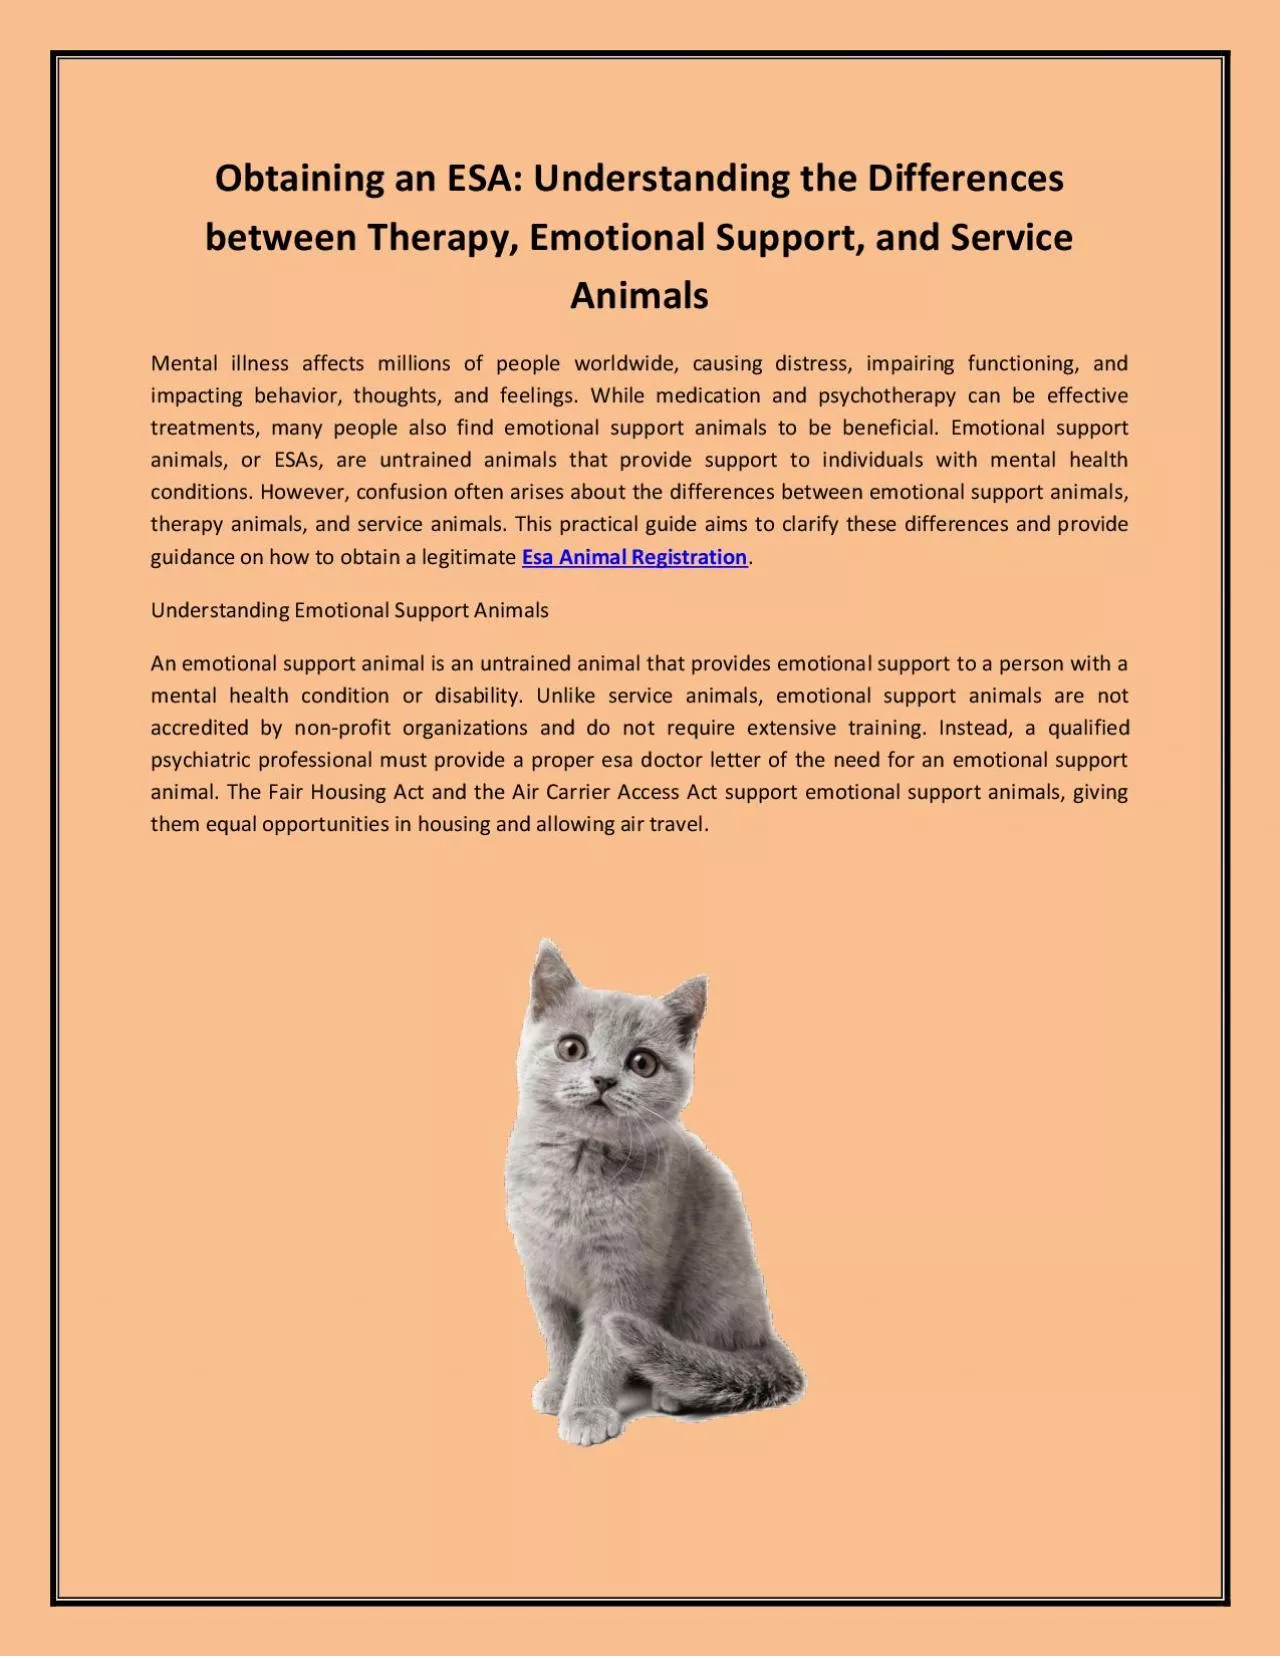 Obtaining an ESA: Understanding the Differences between Therapy, Emotional Support, and